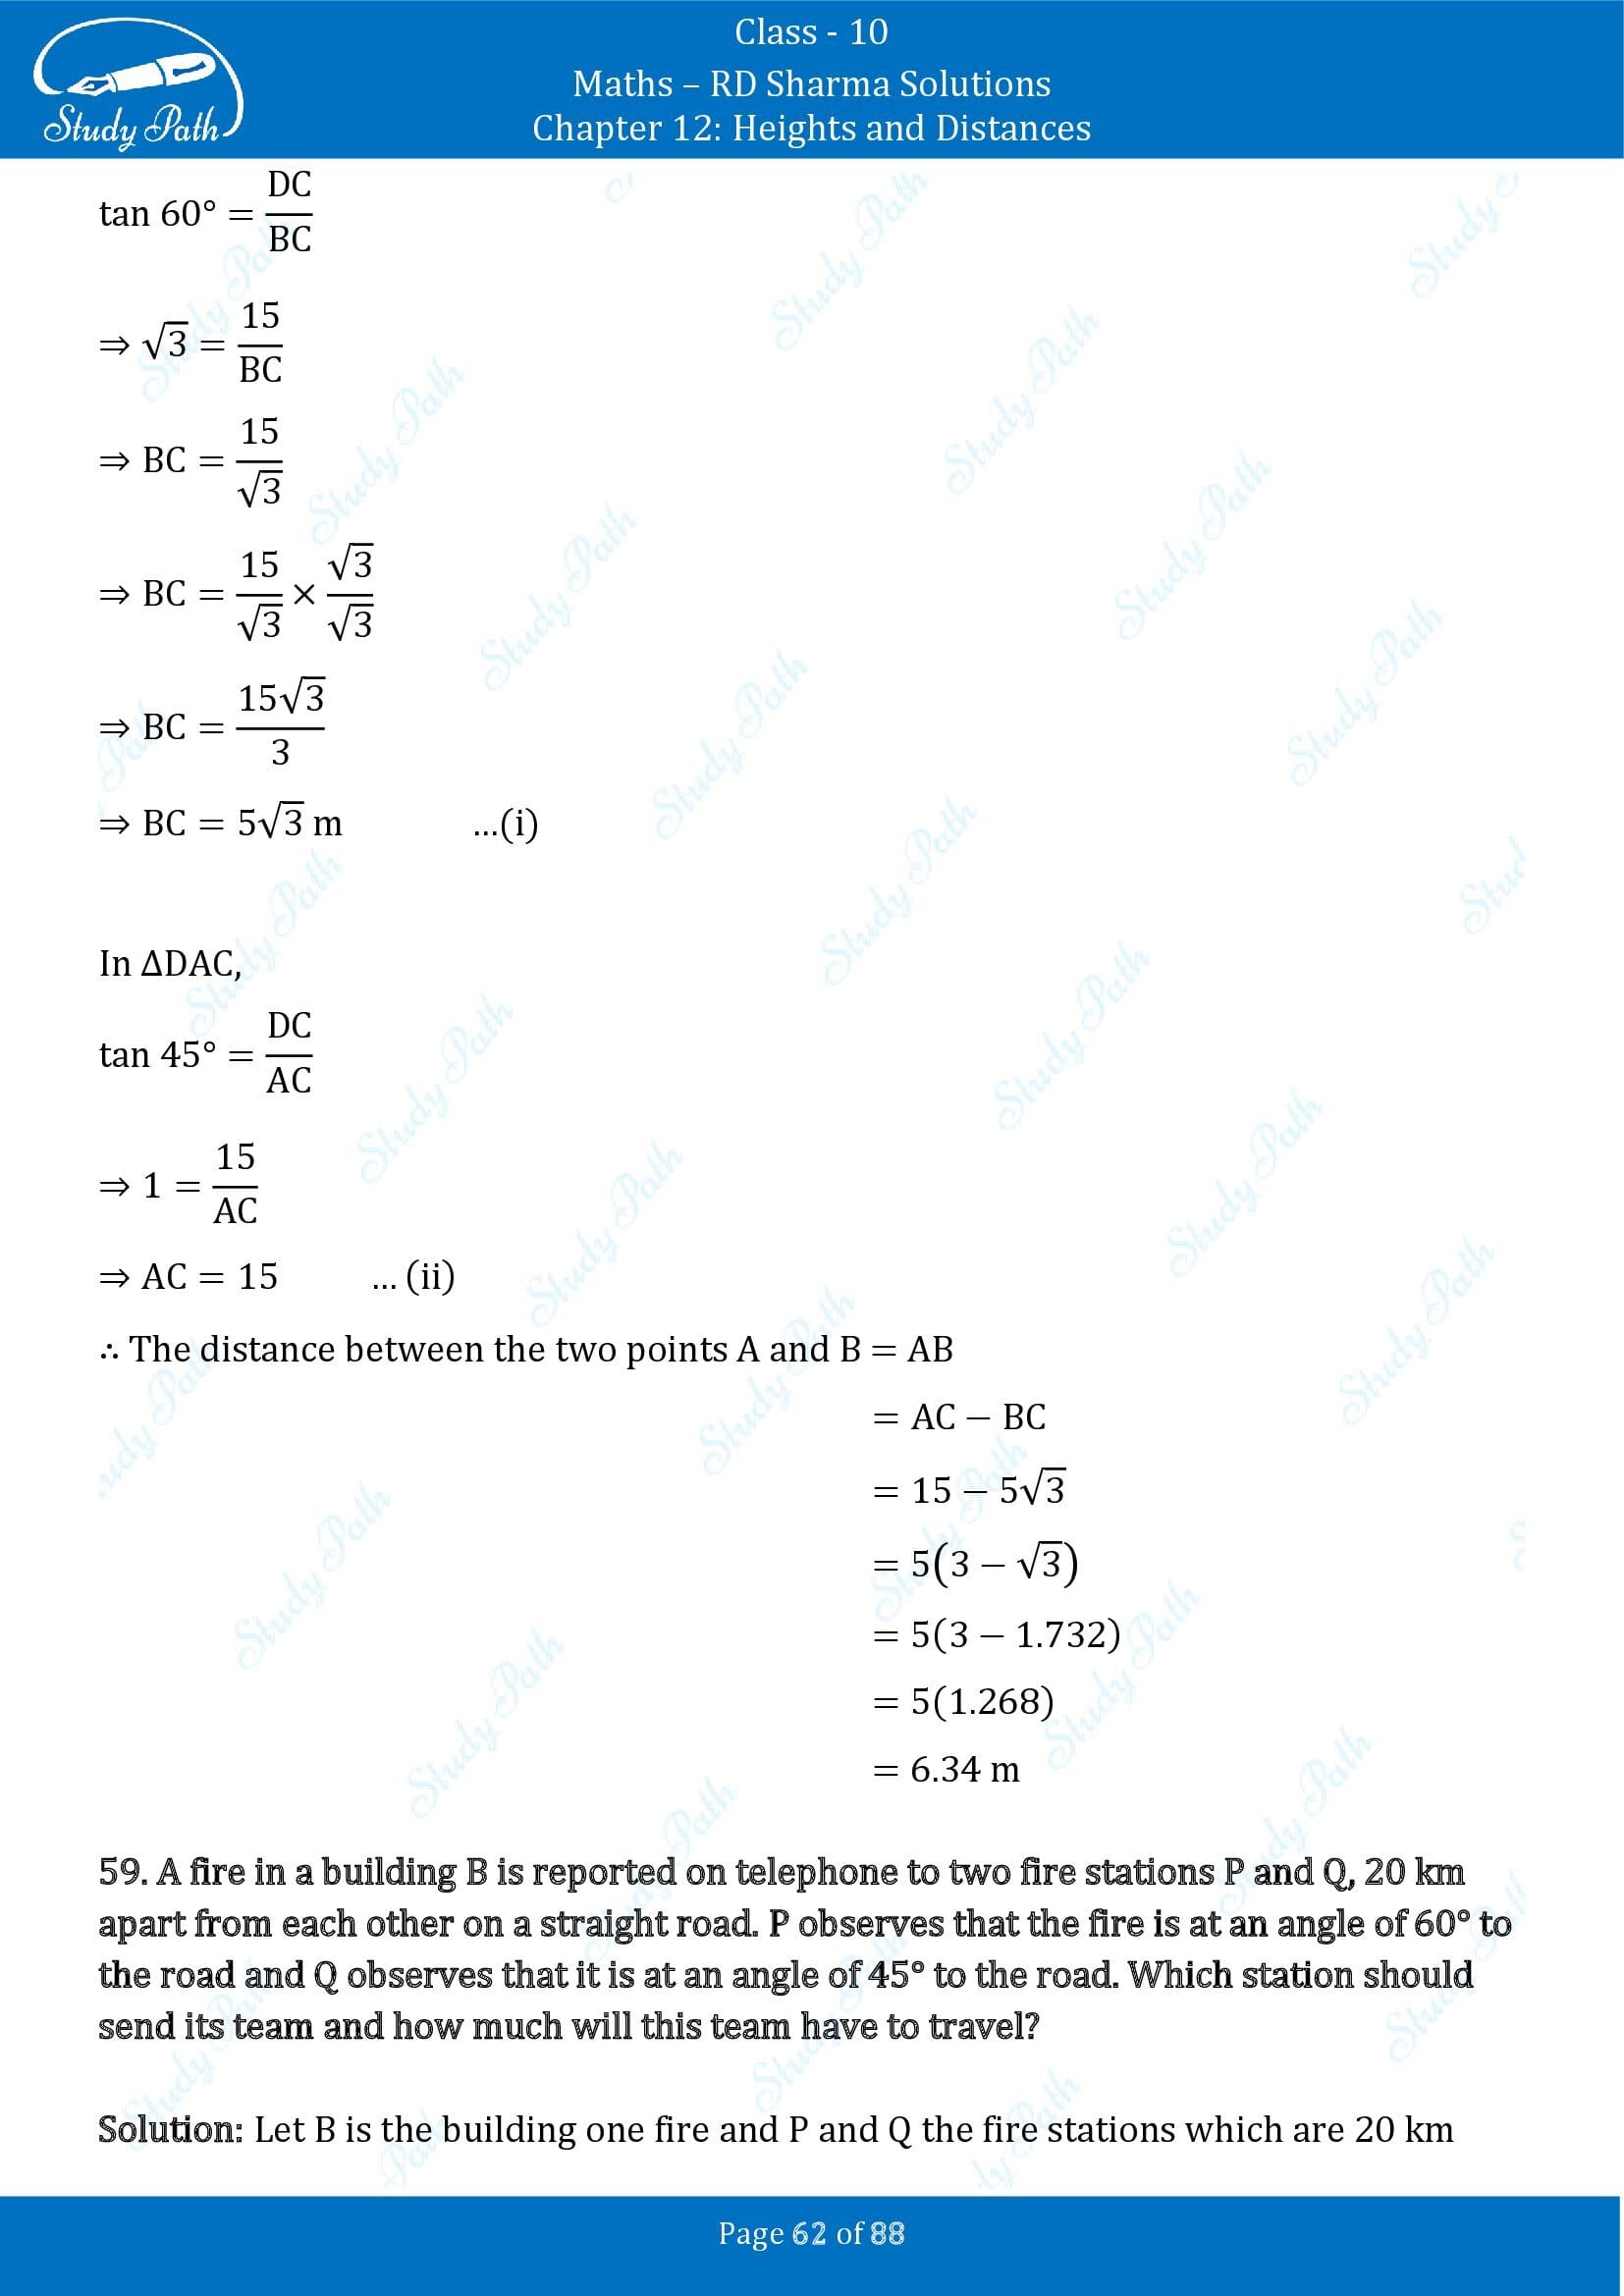 RD Sharma Solutions Class 10 Chapter 12 Heights and Distances Exercise 12.1 00062